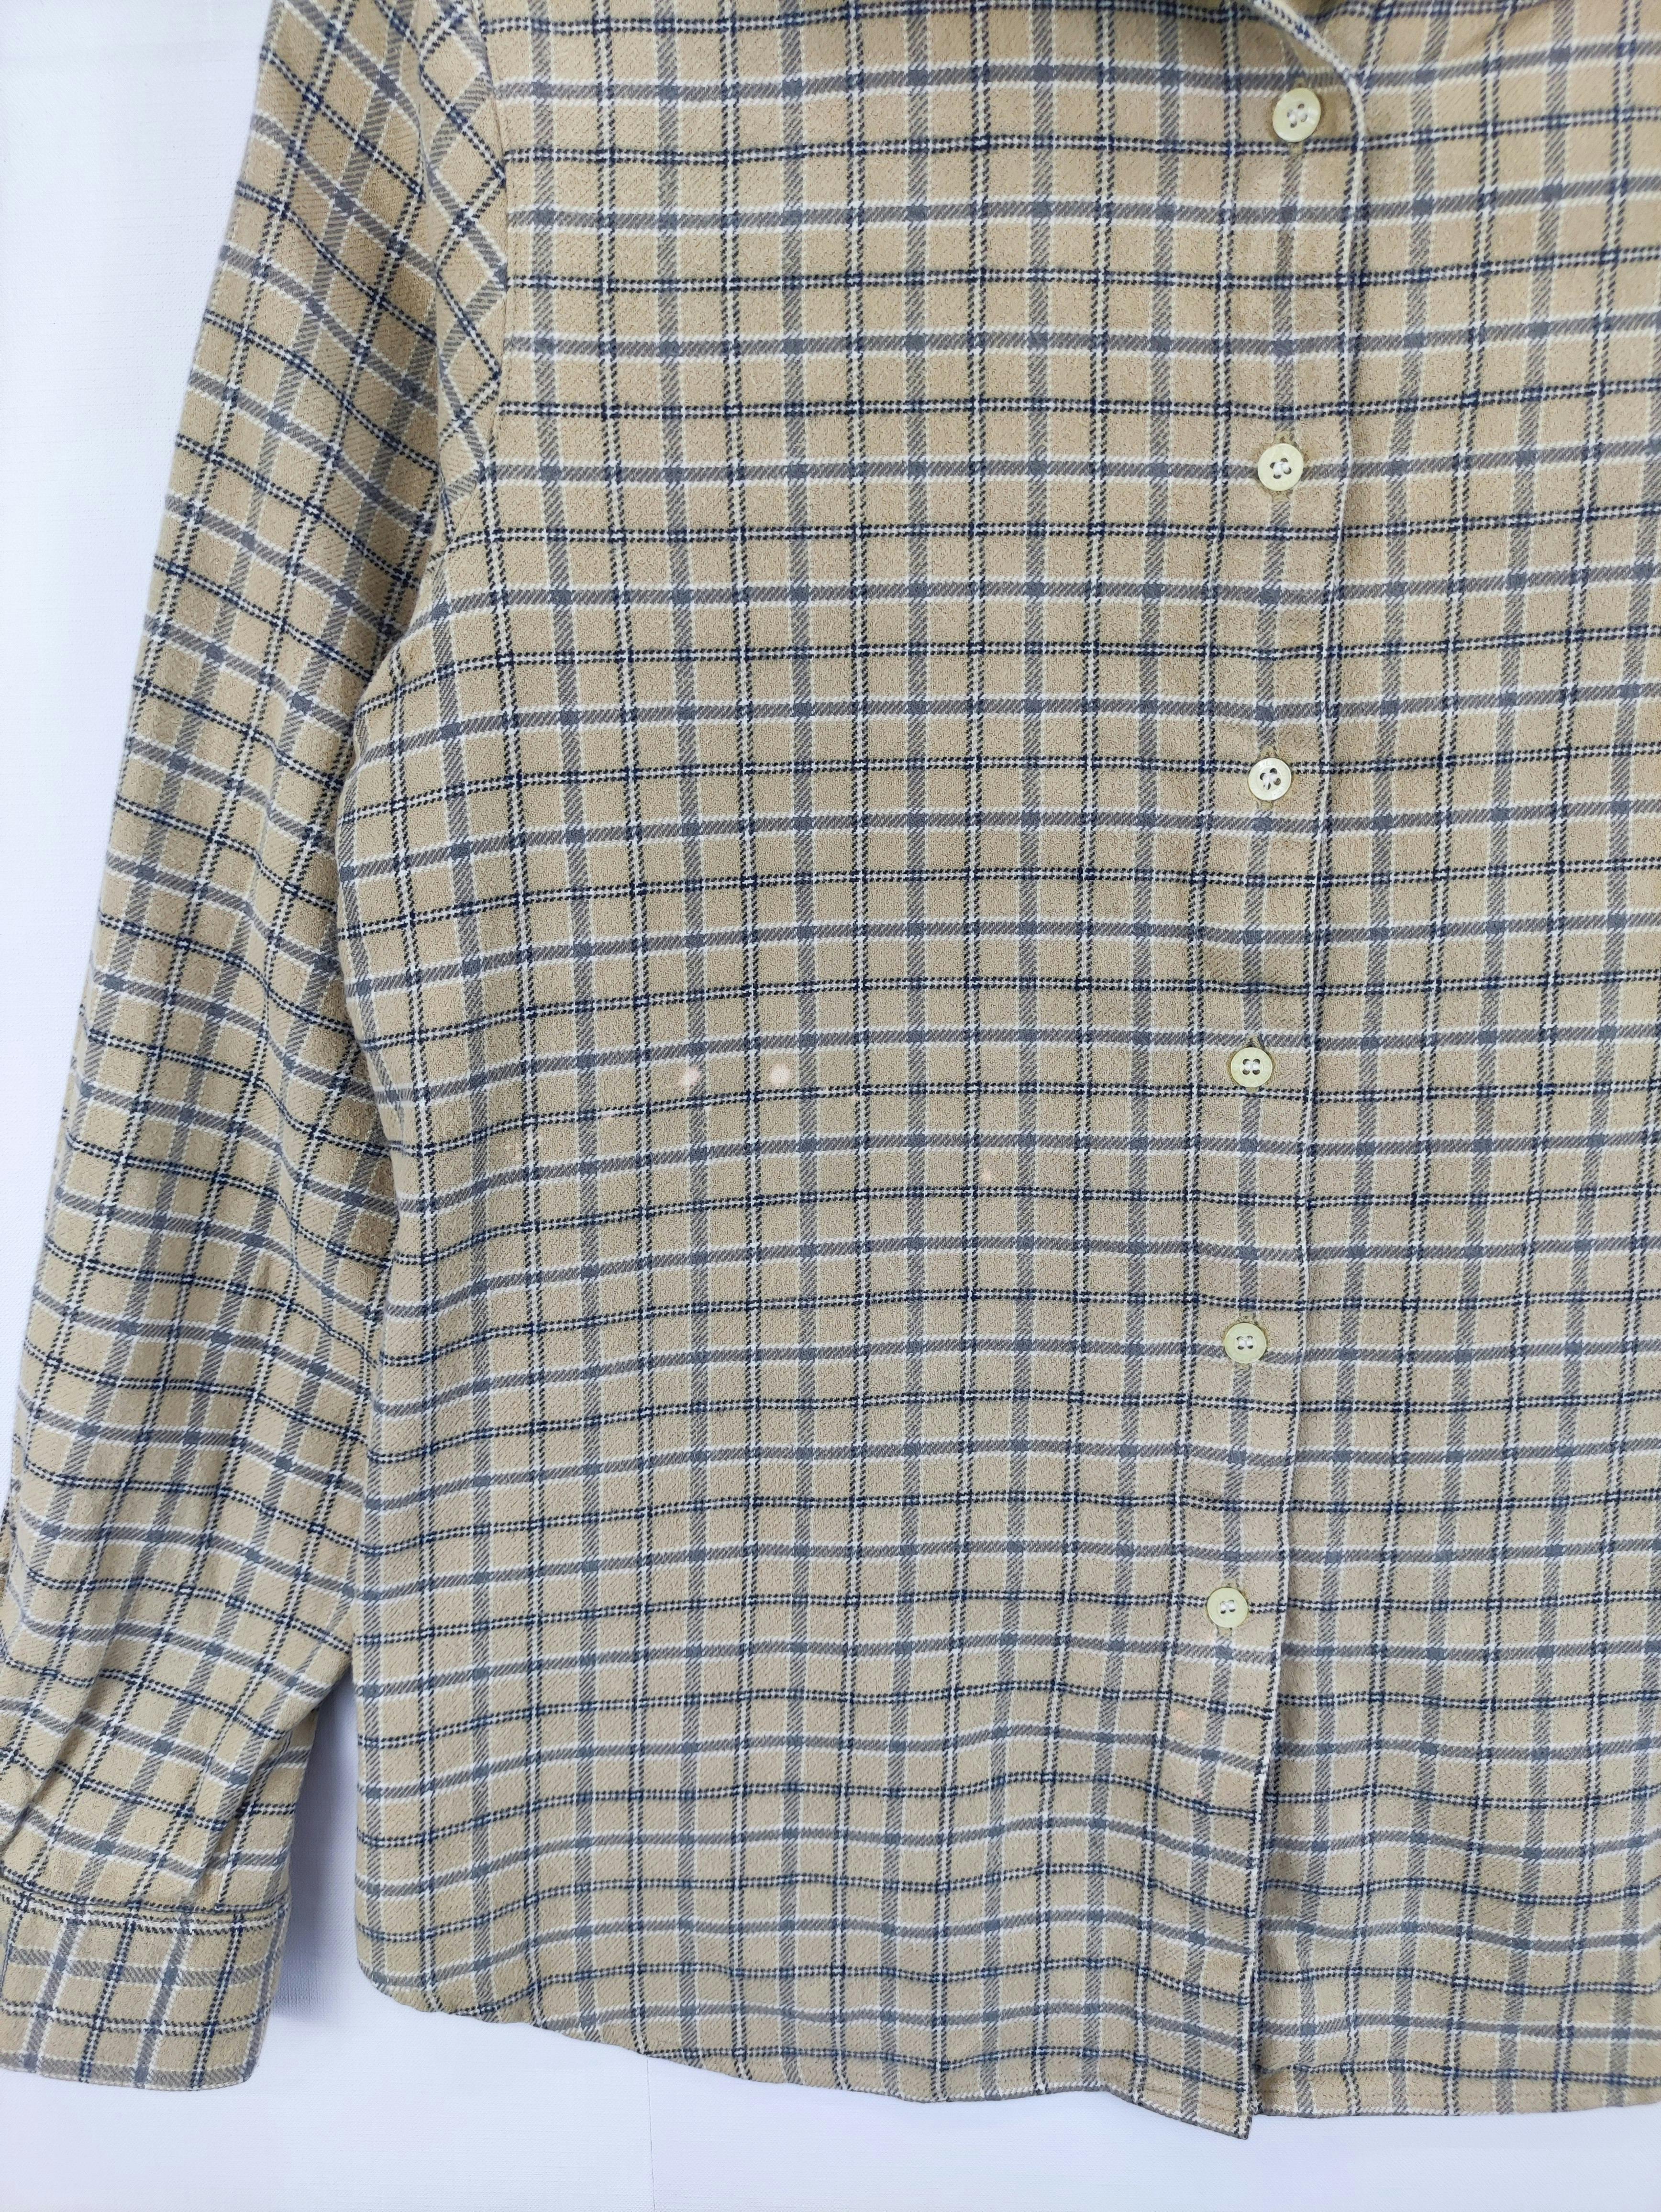 Vintage Lacoste Sports Checkered Shirt Button Up - 2